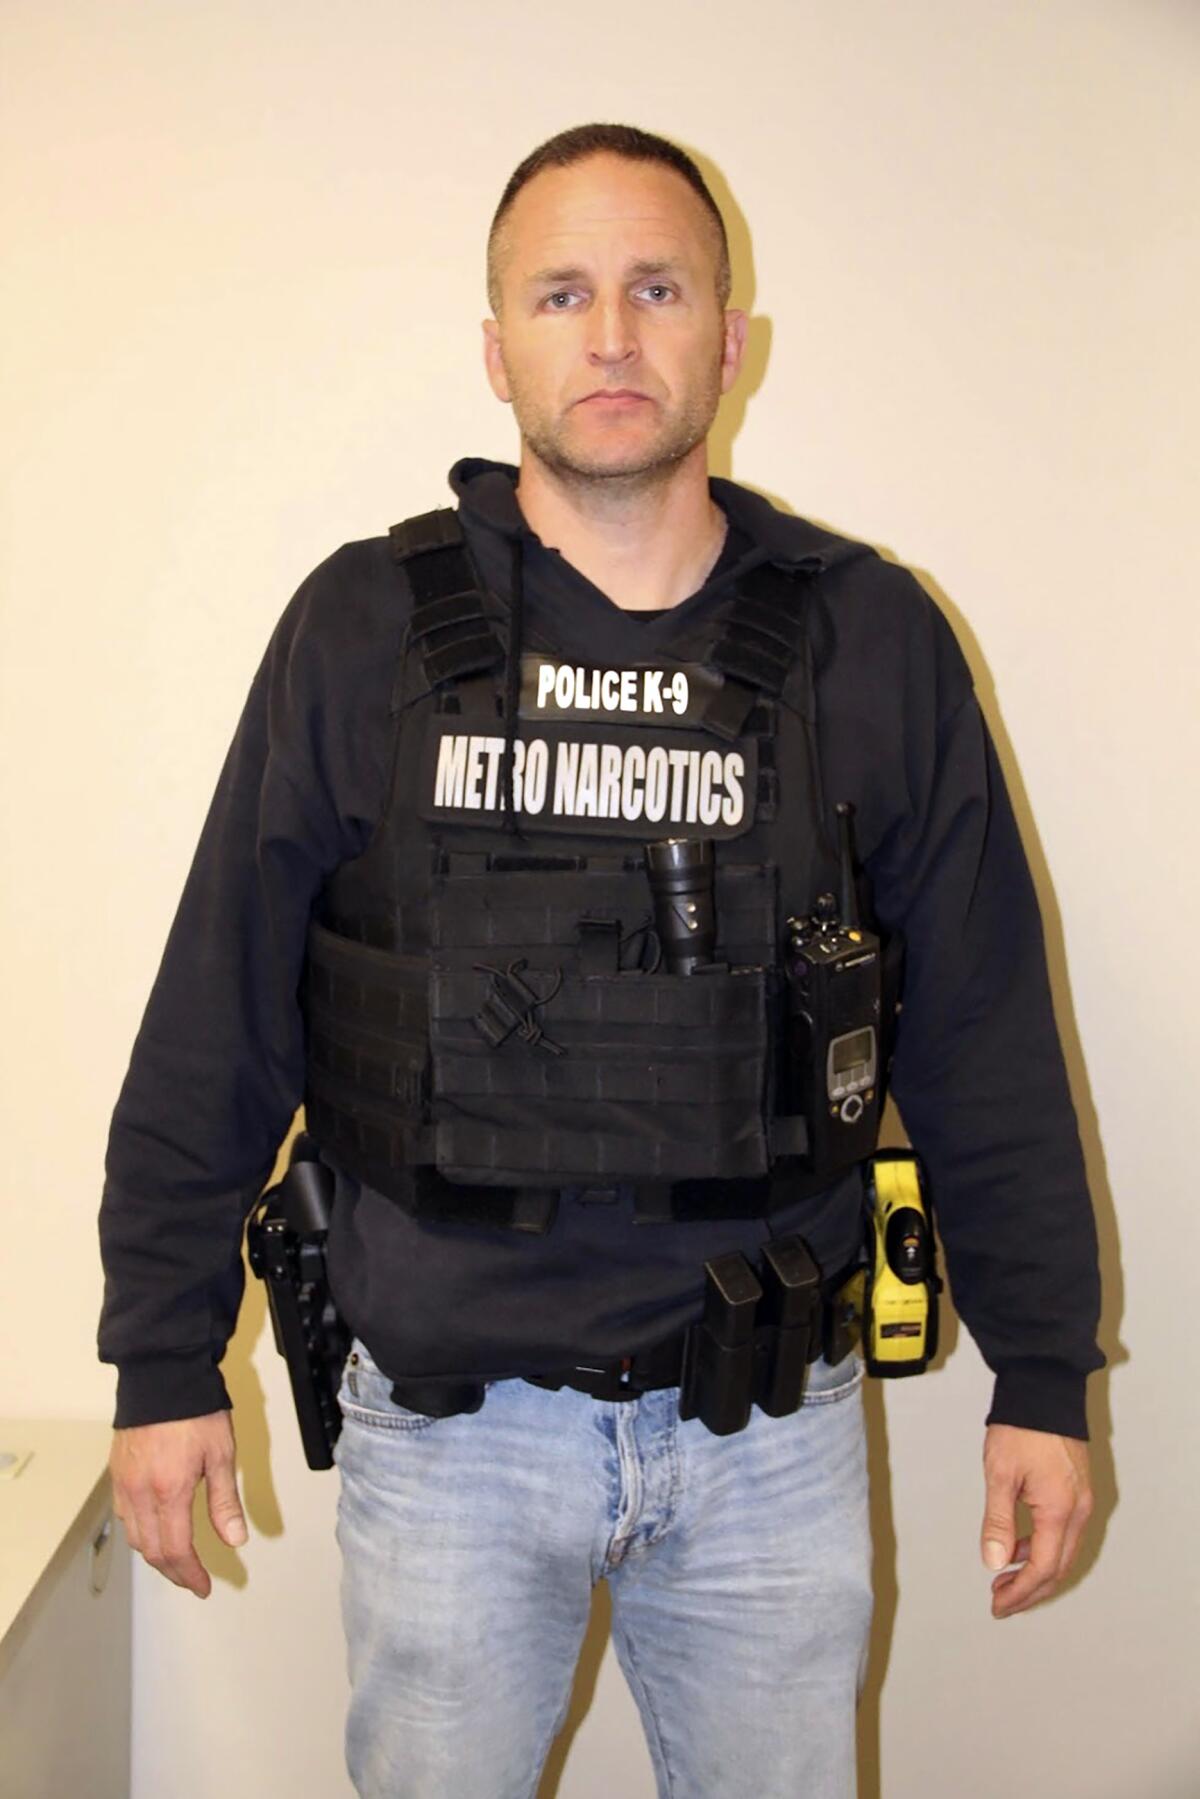 A man in a dark shirt and vest bearing the words "Police K-9 Metro Narcotics"